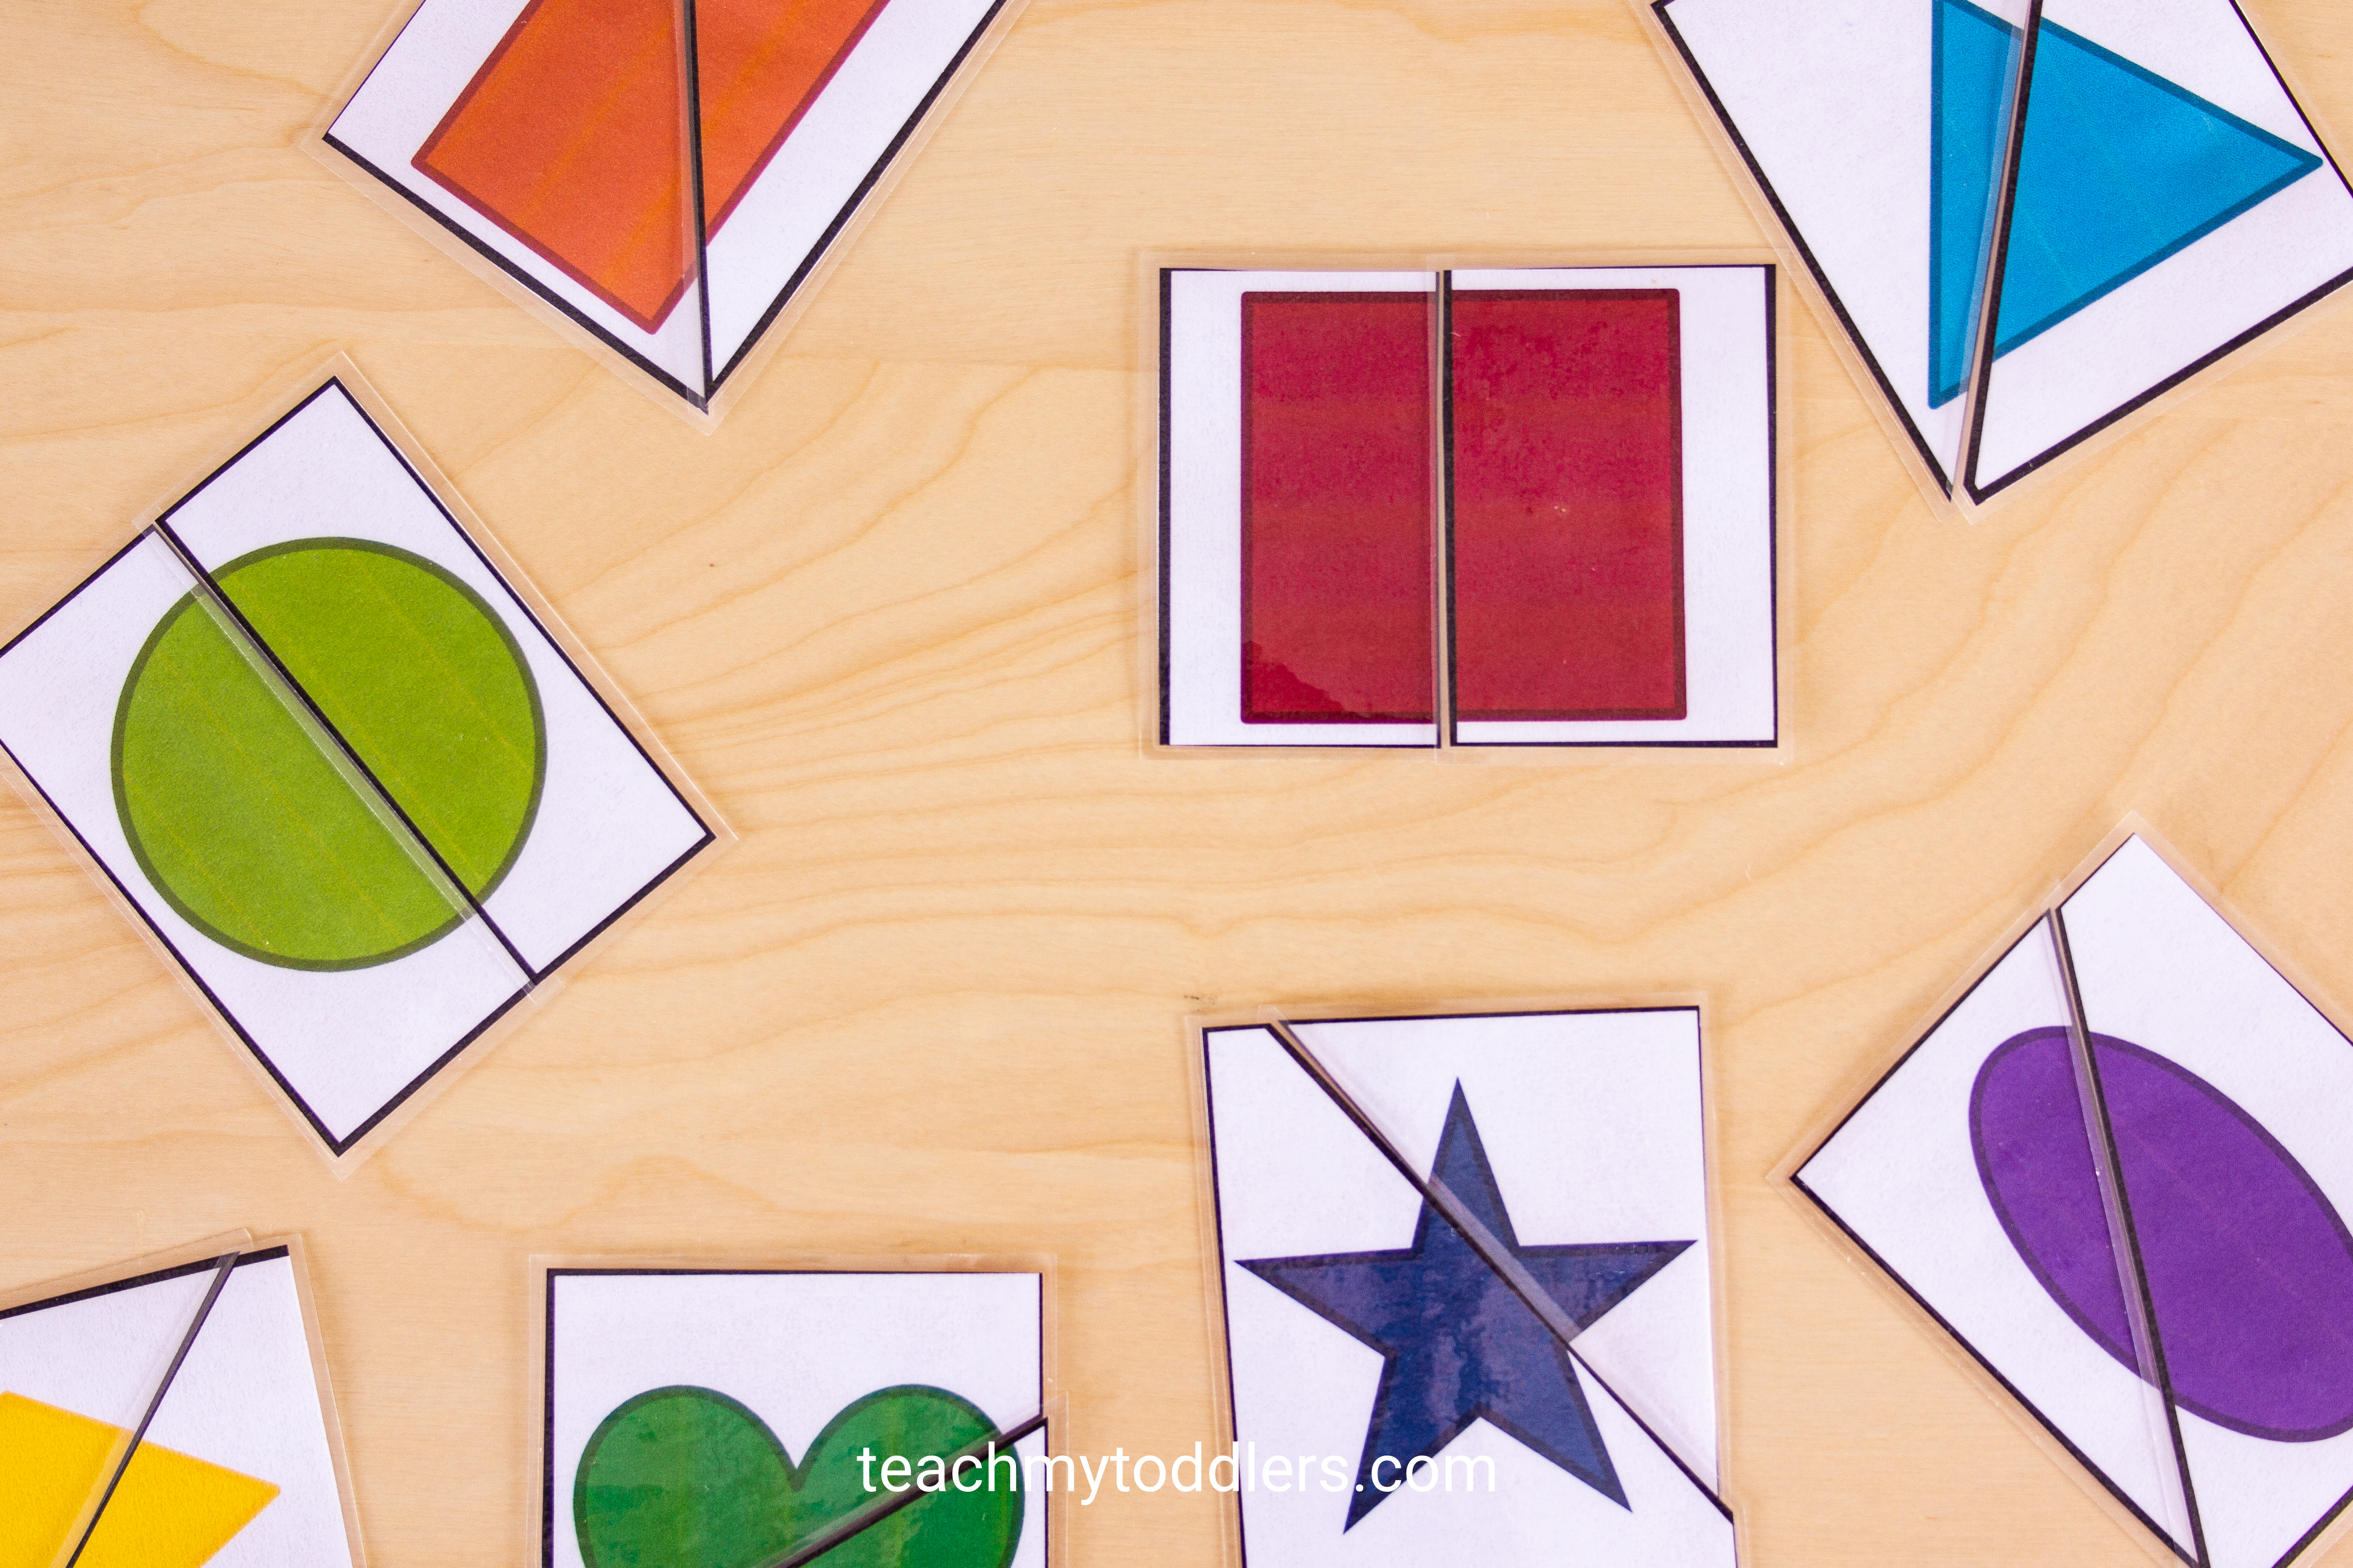 A fun activity to teach your toddler shapes with this puzzle game